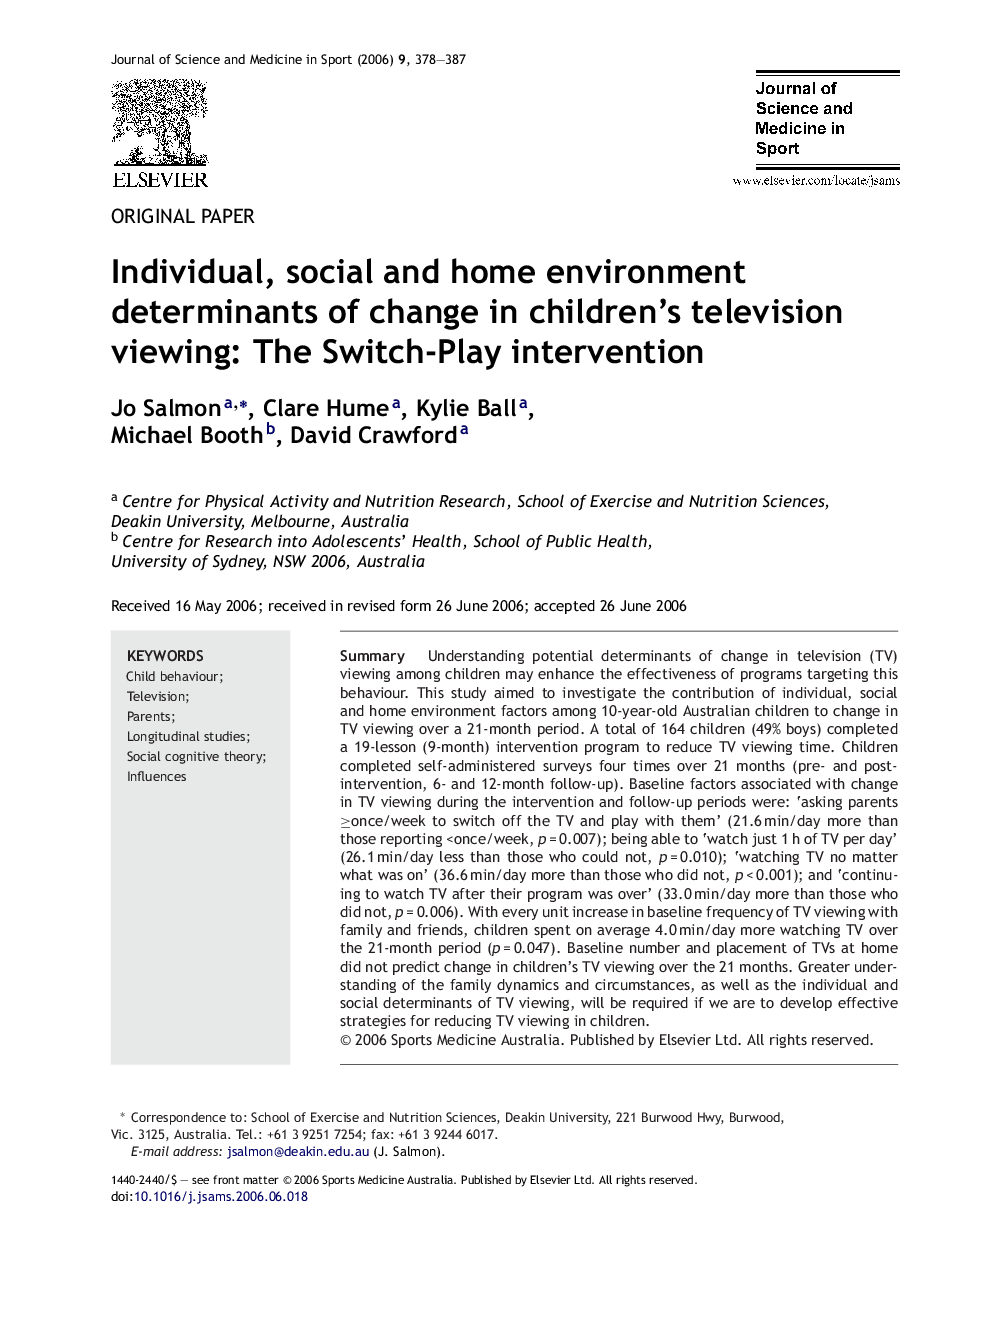 Individual, social and home environment determinants of change in children's television viewing: The Switch-Play intervention